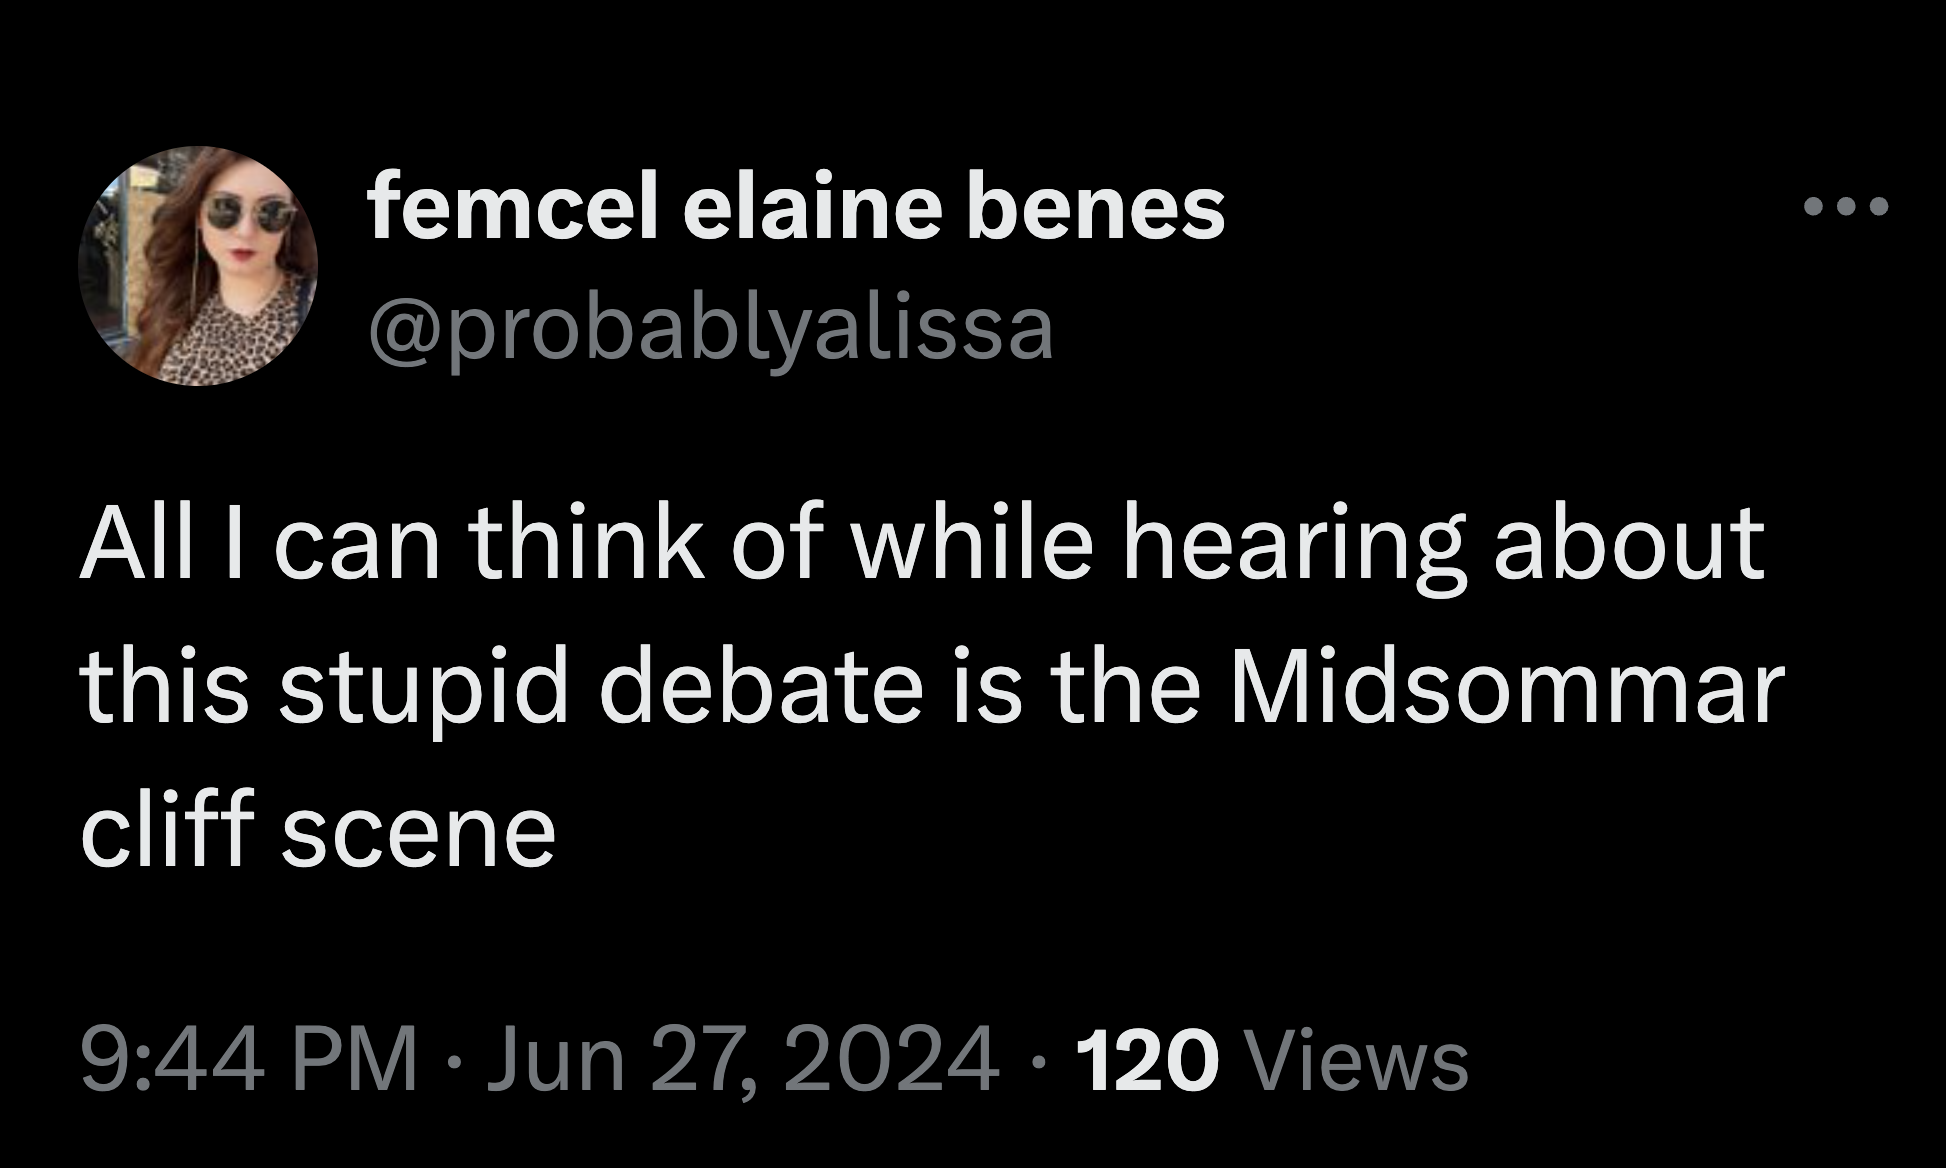 chiton - femcel elaine benes All I can think of while hearing about this stupid debate is the Midsommar cliff scene 120 Views